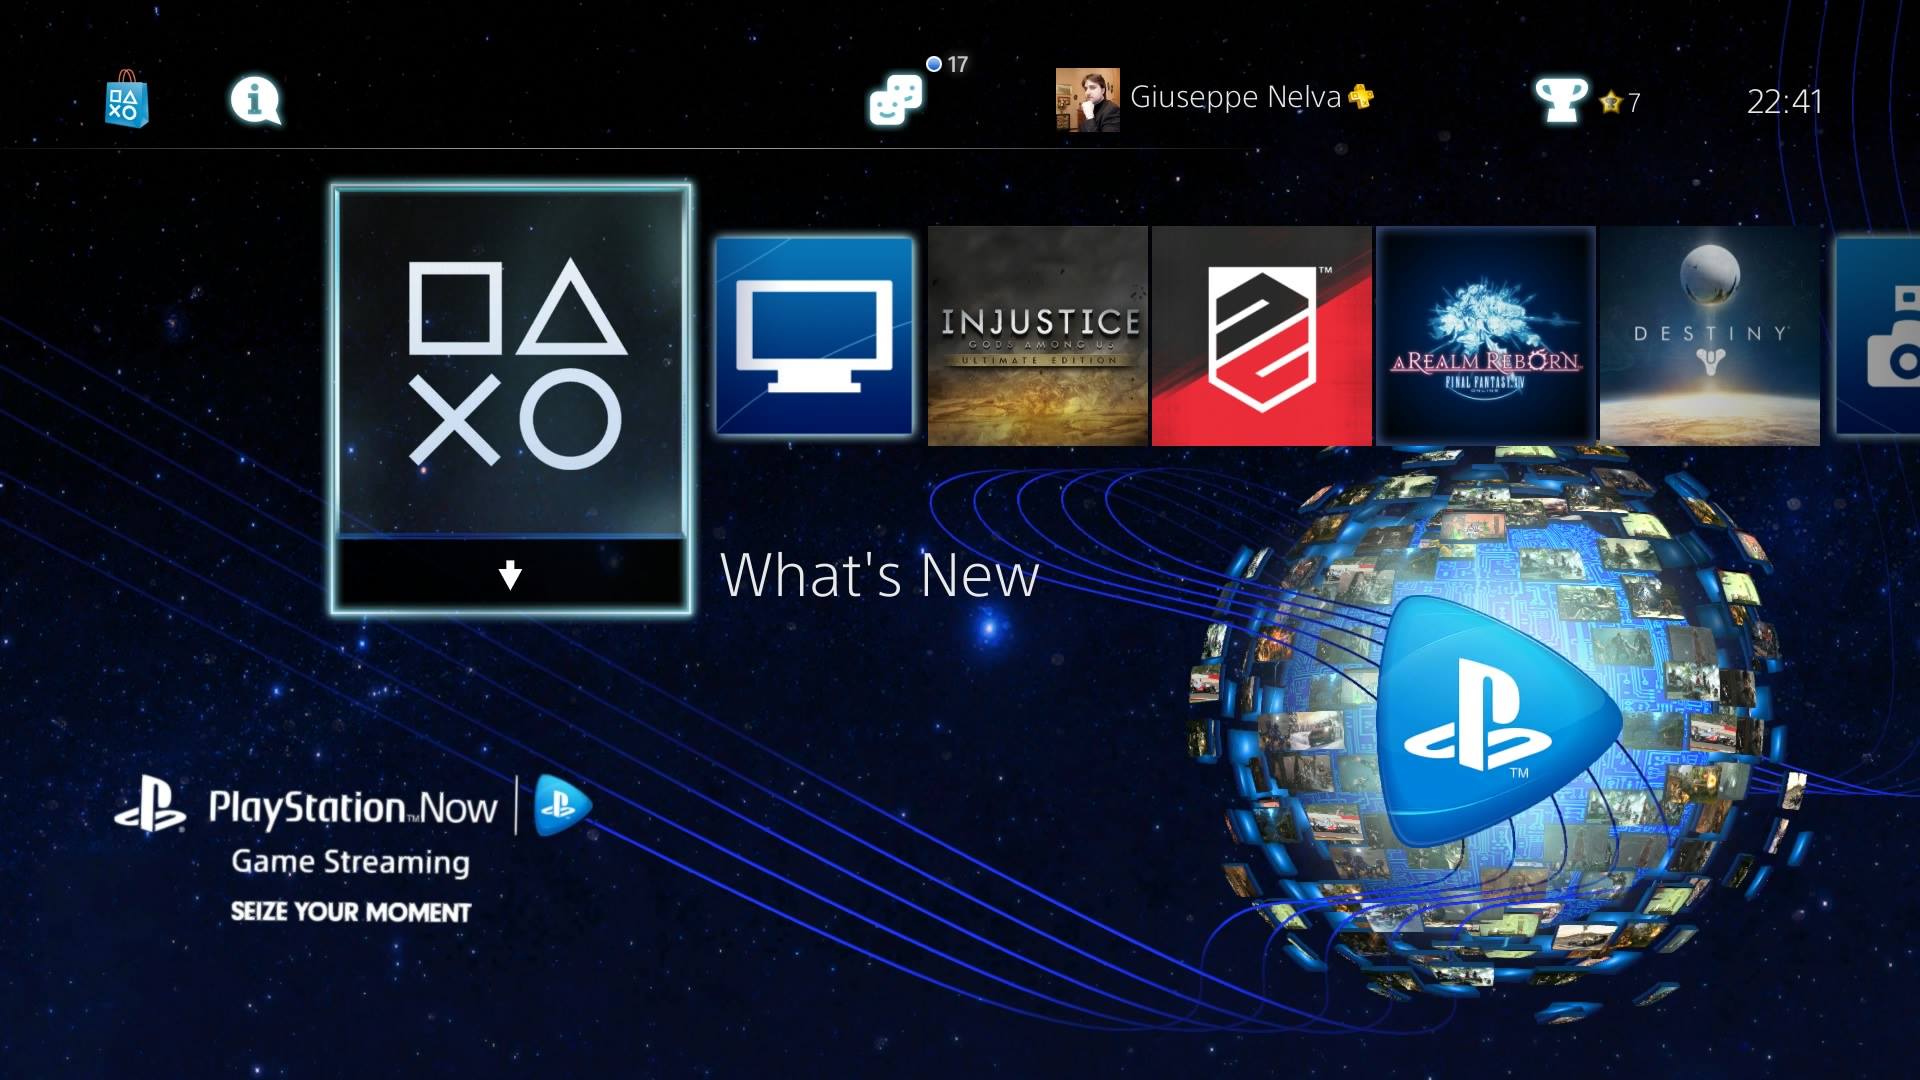 Free PlayStation Now PS4 Dynamic Theme Just Released